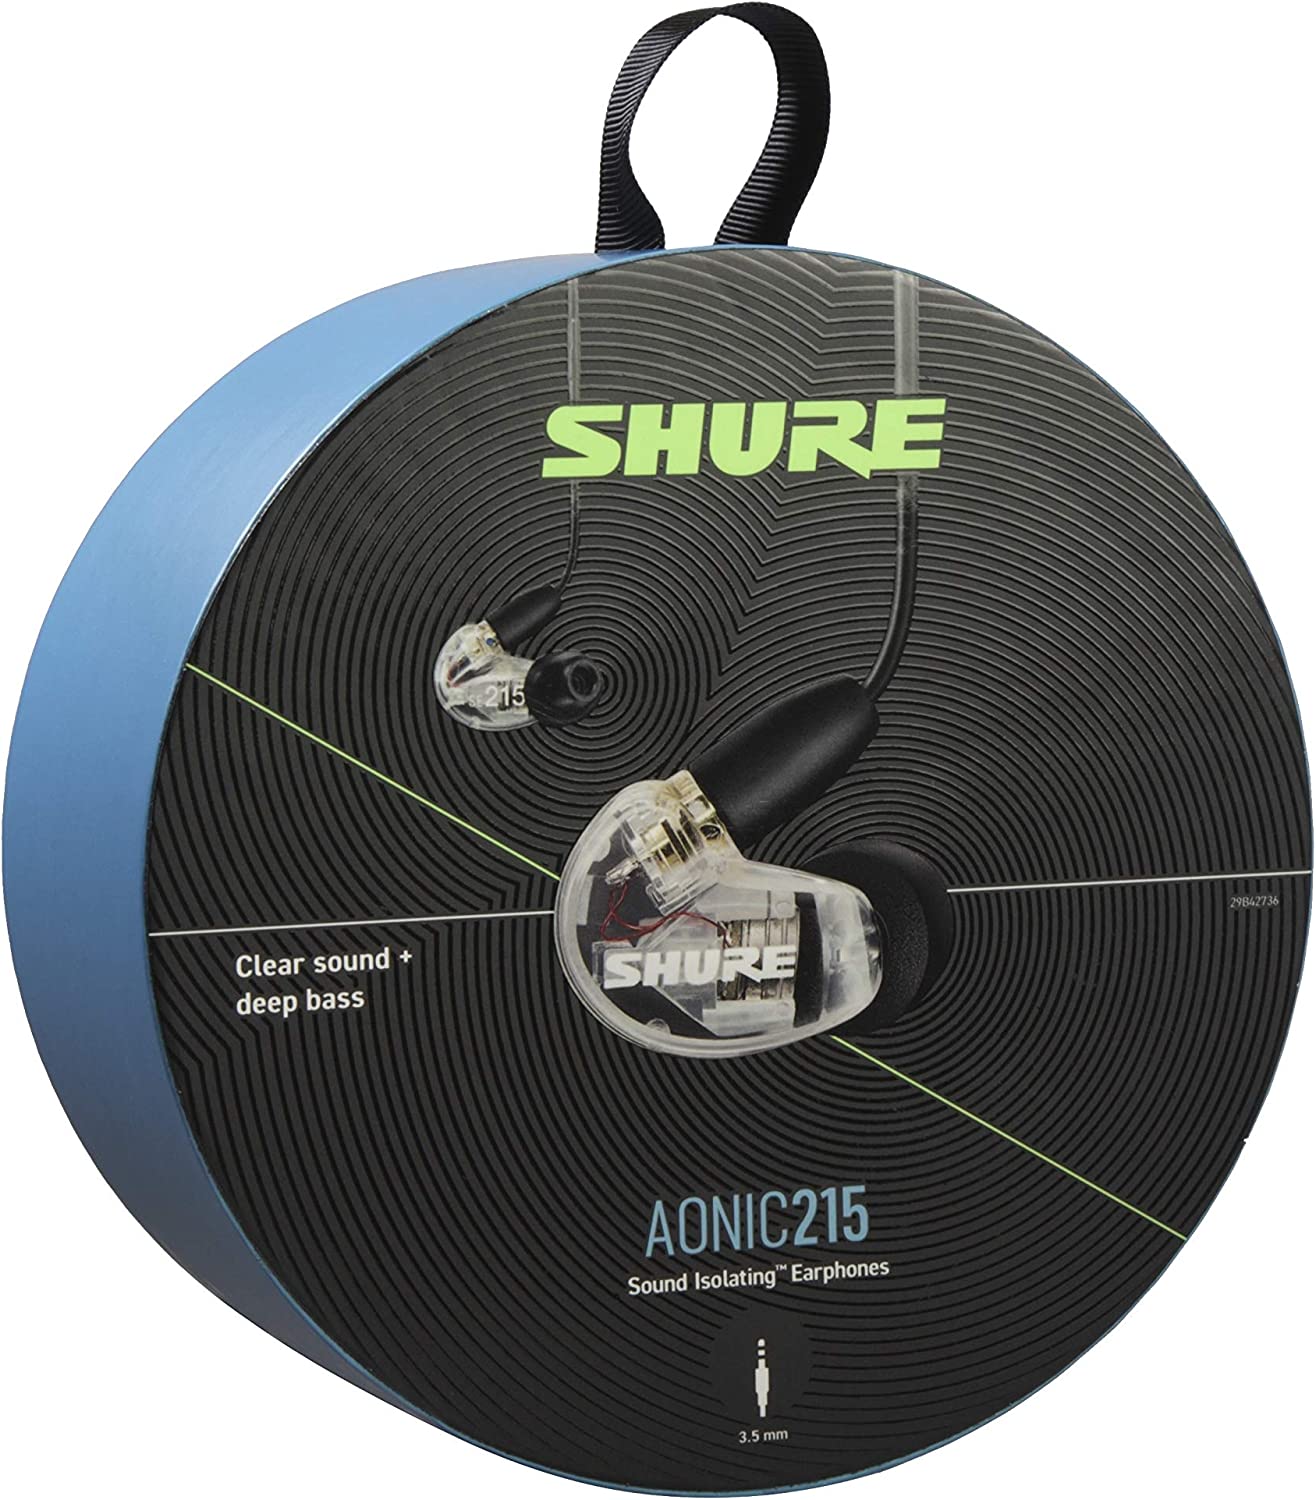 SHURE SE215 SOUND ISOLATING EARPHONES - CLEAR